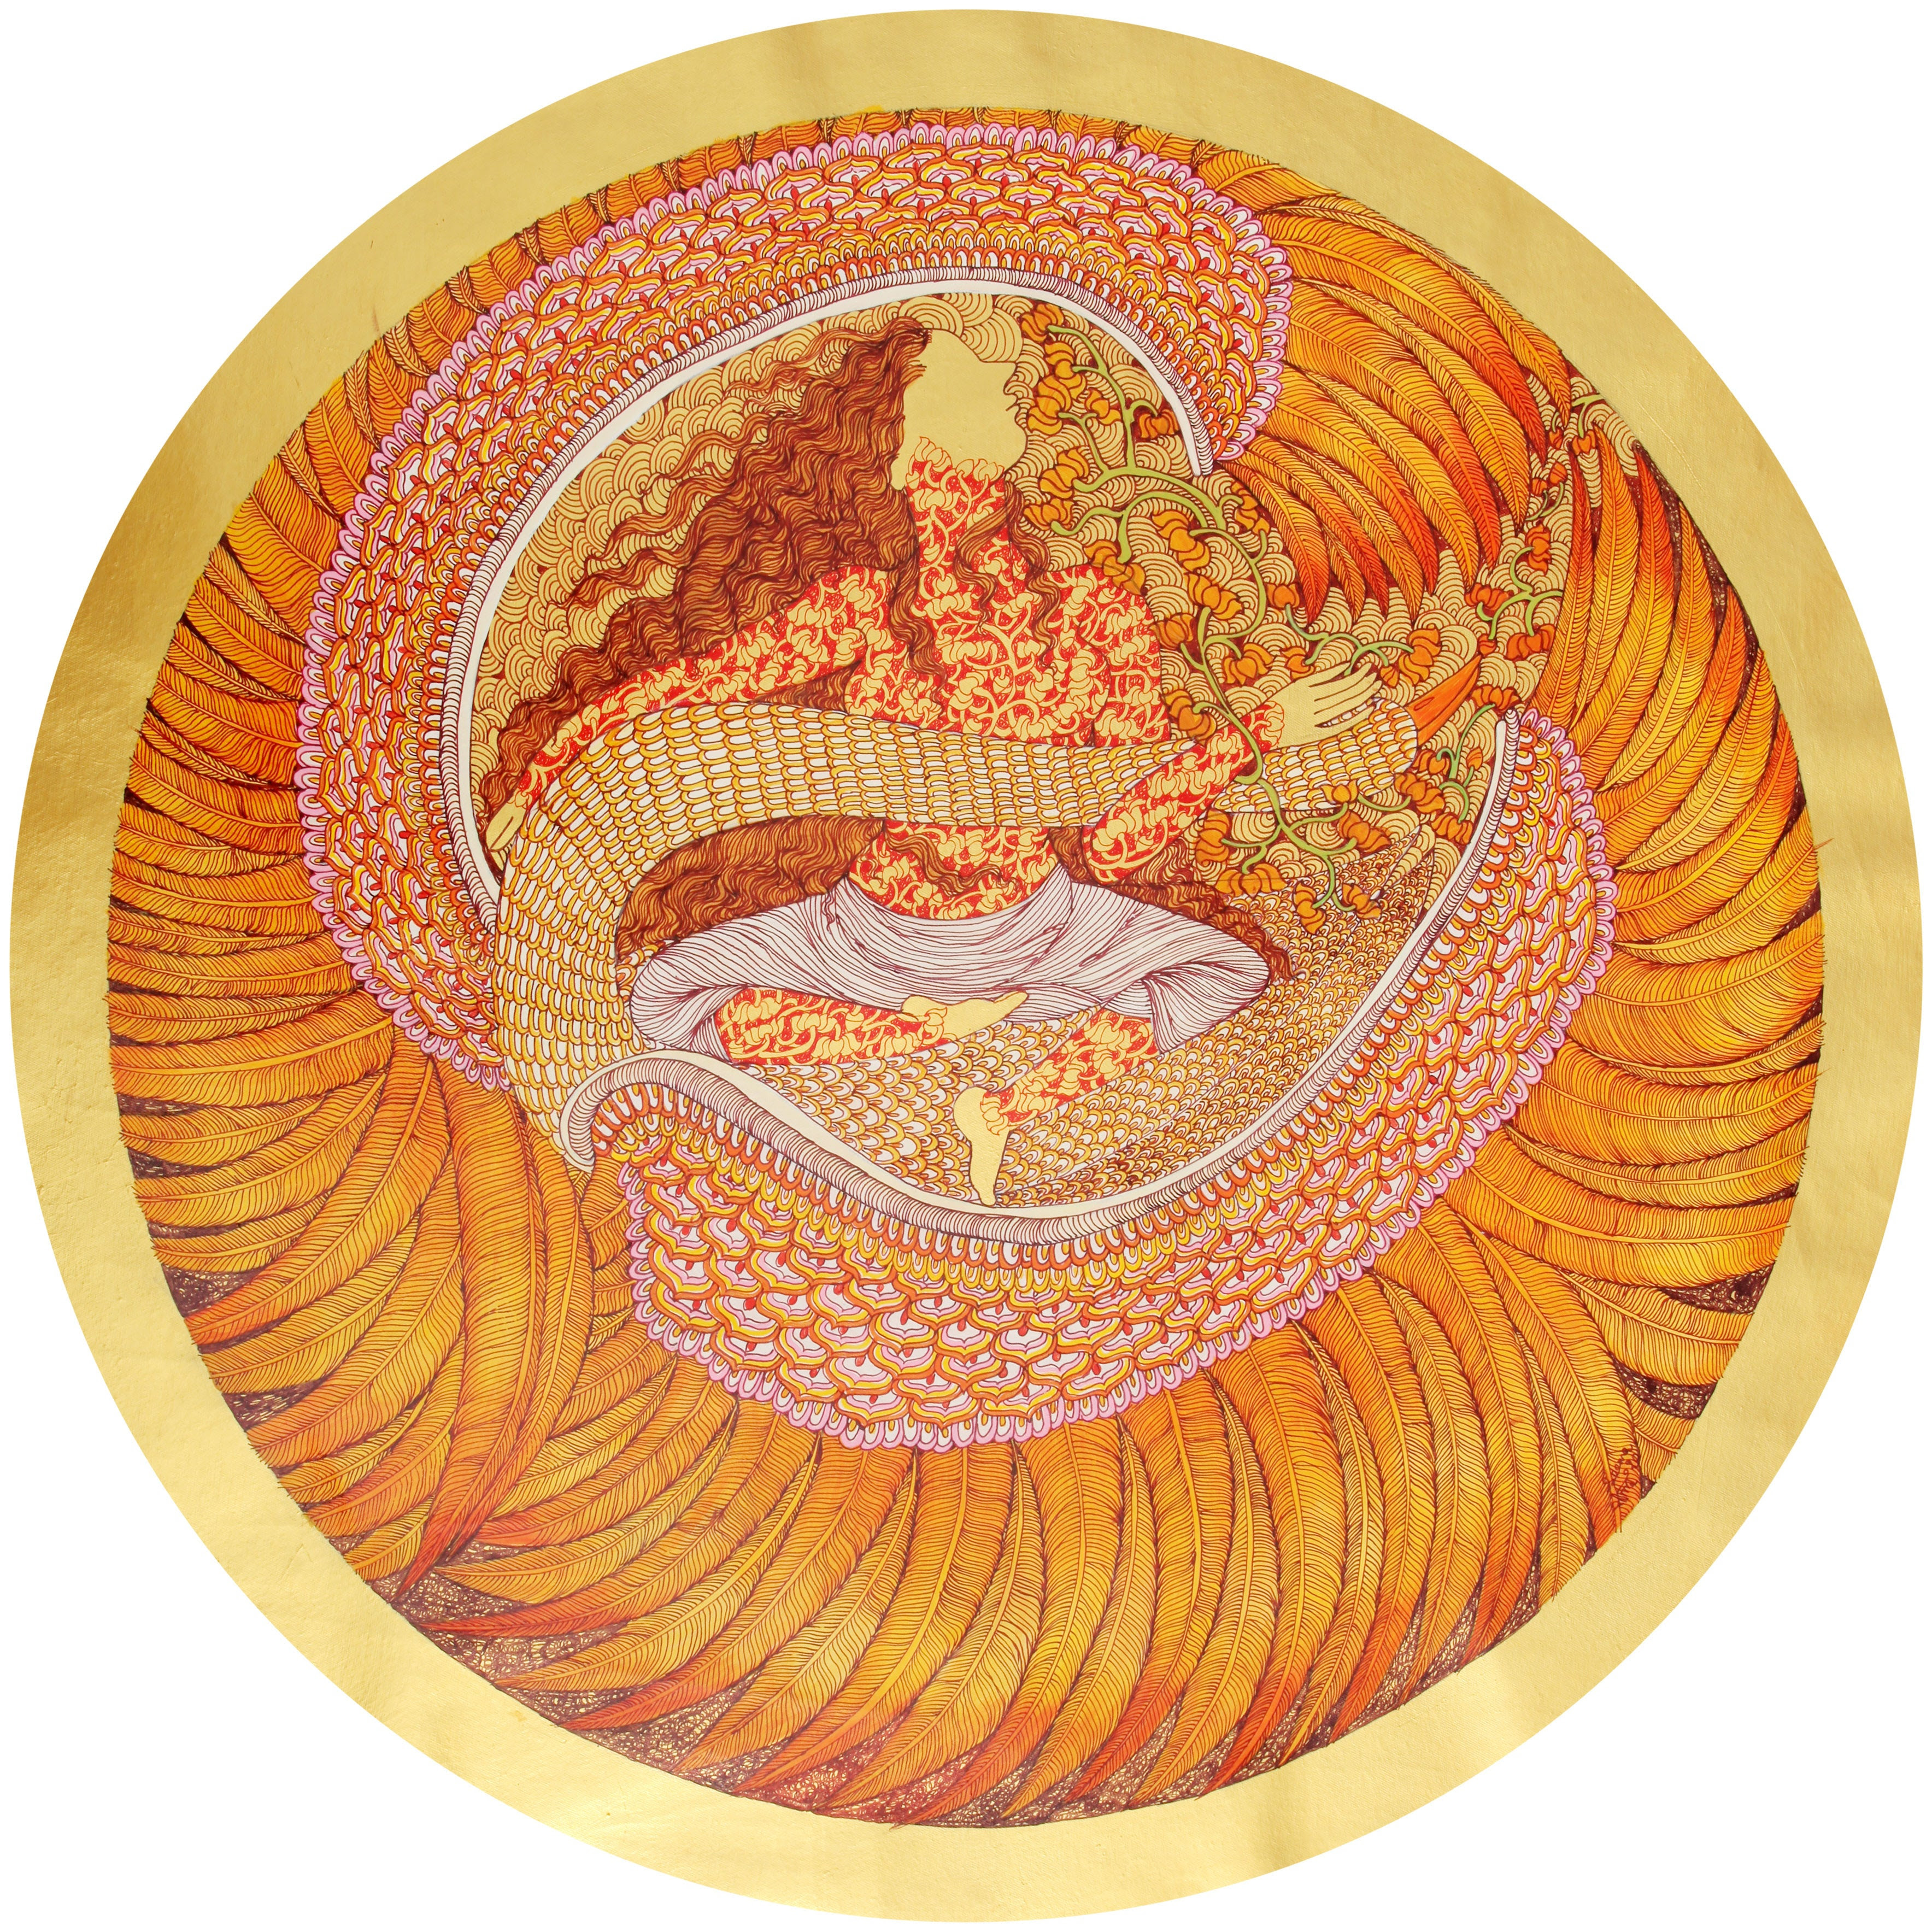 Image of The Golden Womb Series